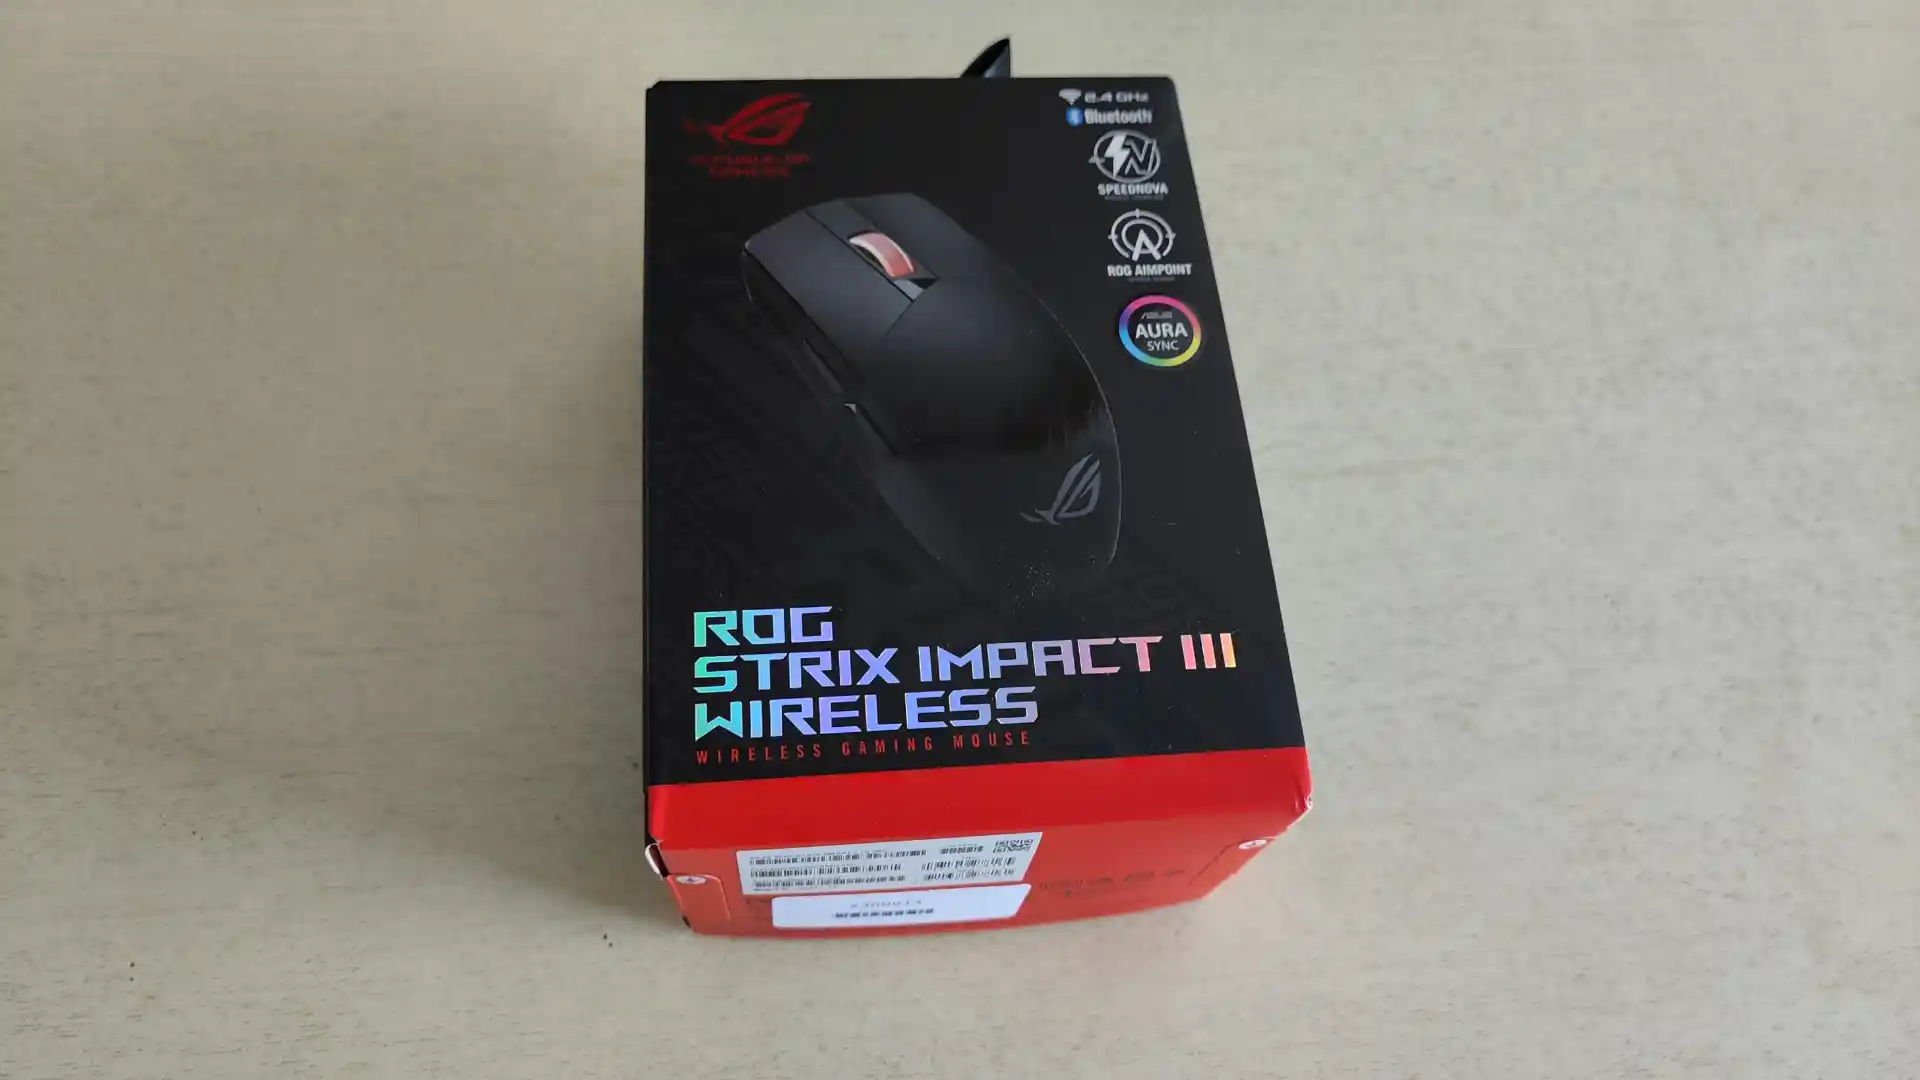 ROG Strix Impact III Wireless Gaming Mouse foto unboxing